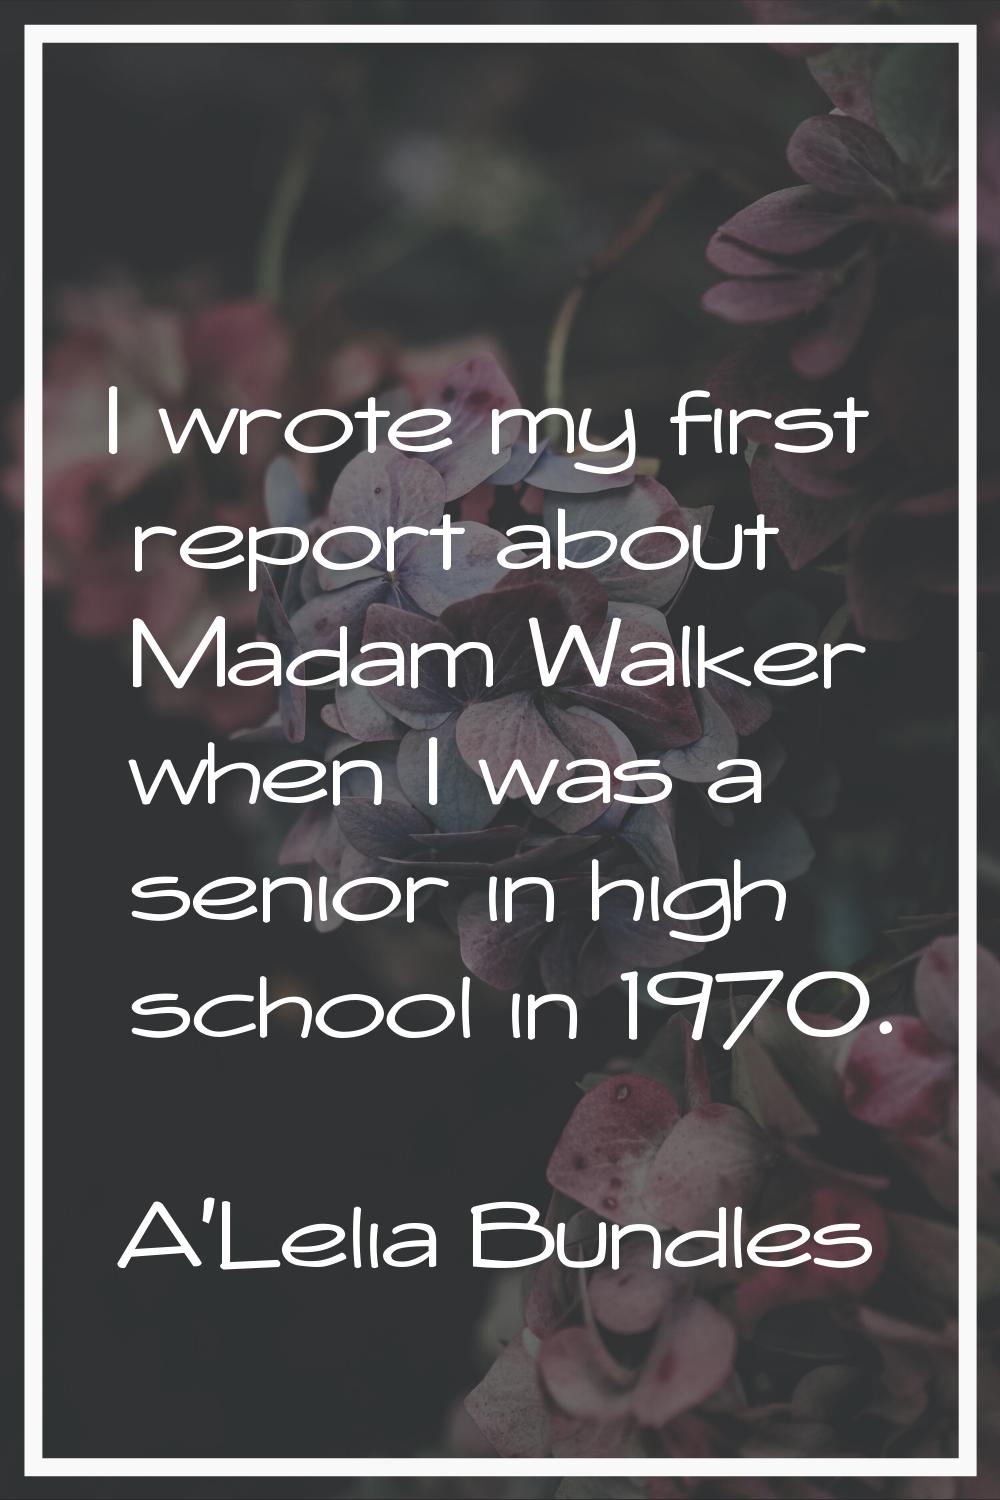 I wrote my first report about Madam Walker when I was a senior in high school in 1970.